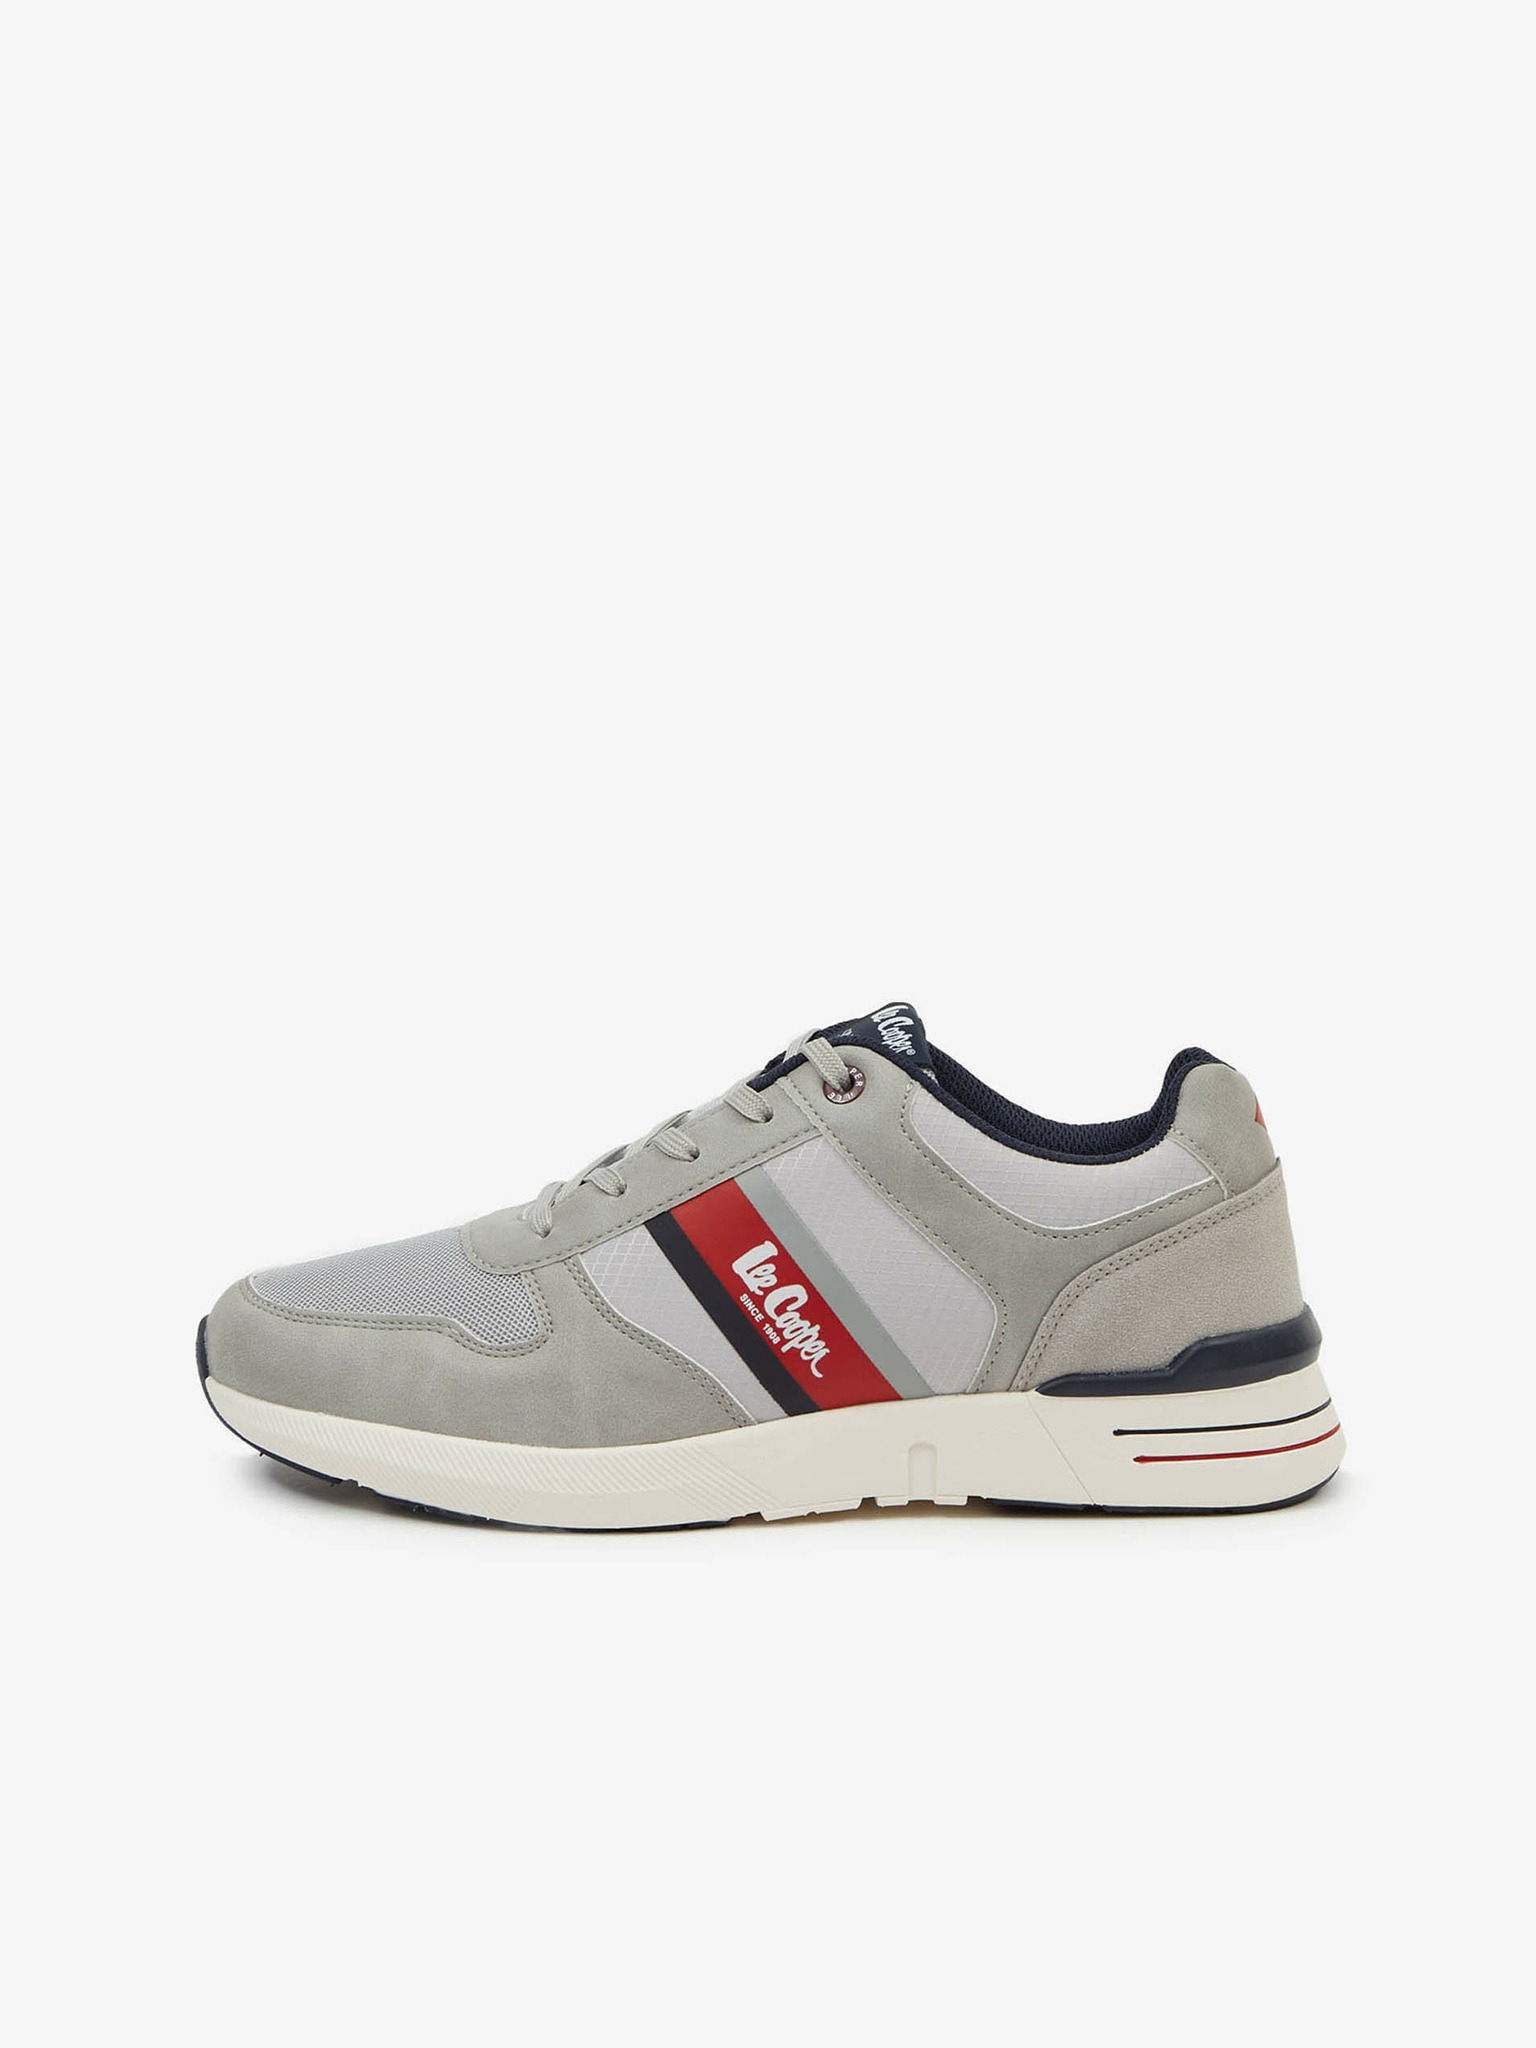 Top more than 174 lee cooper grey sneakers latest